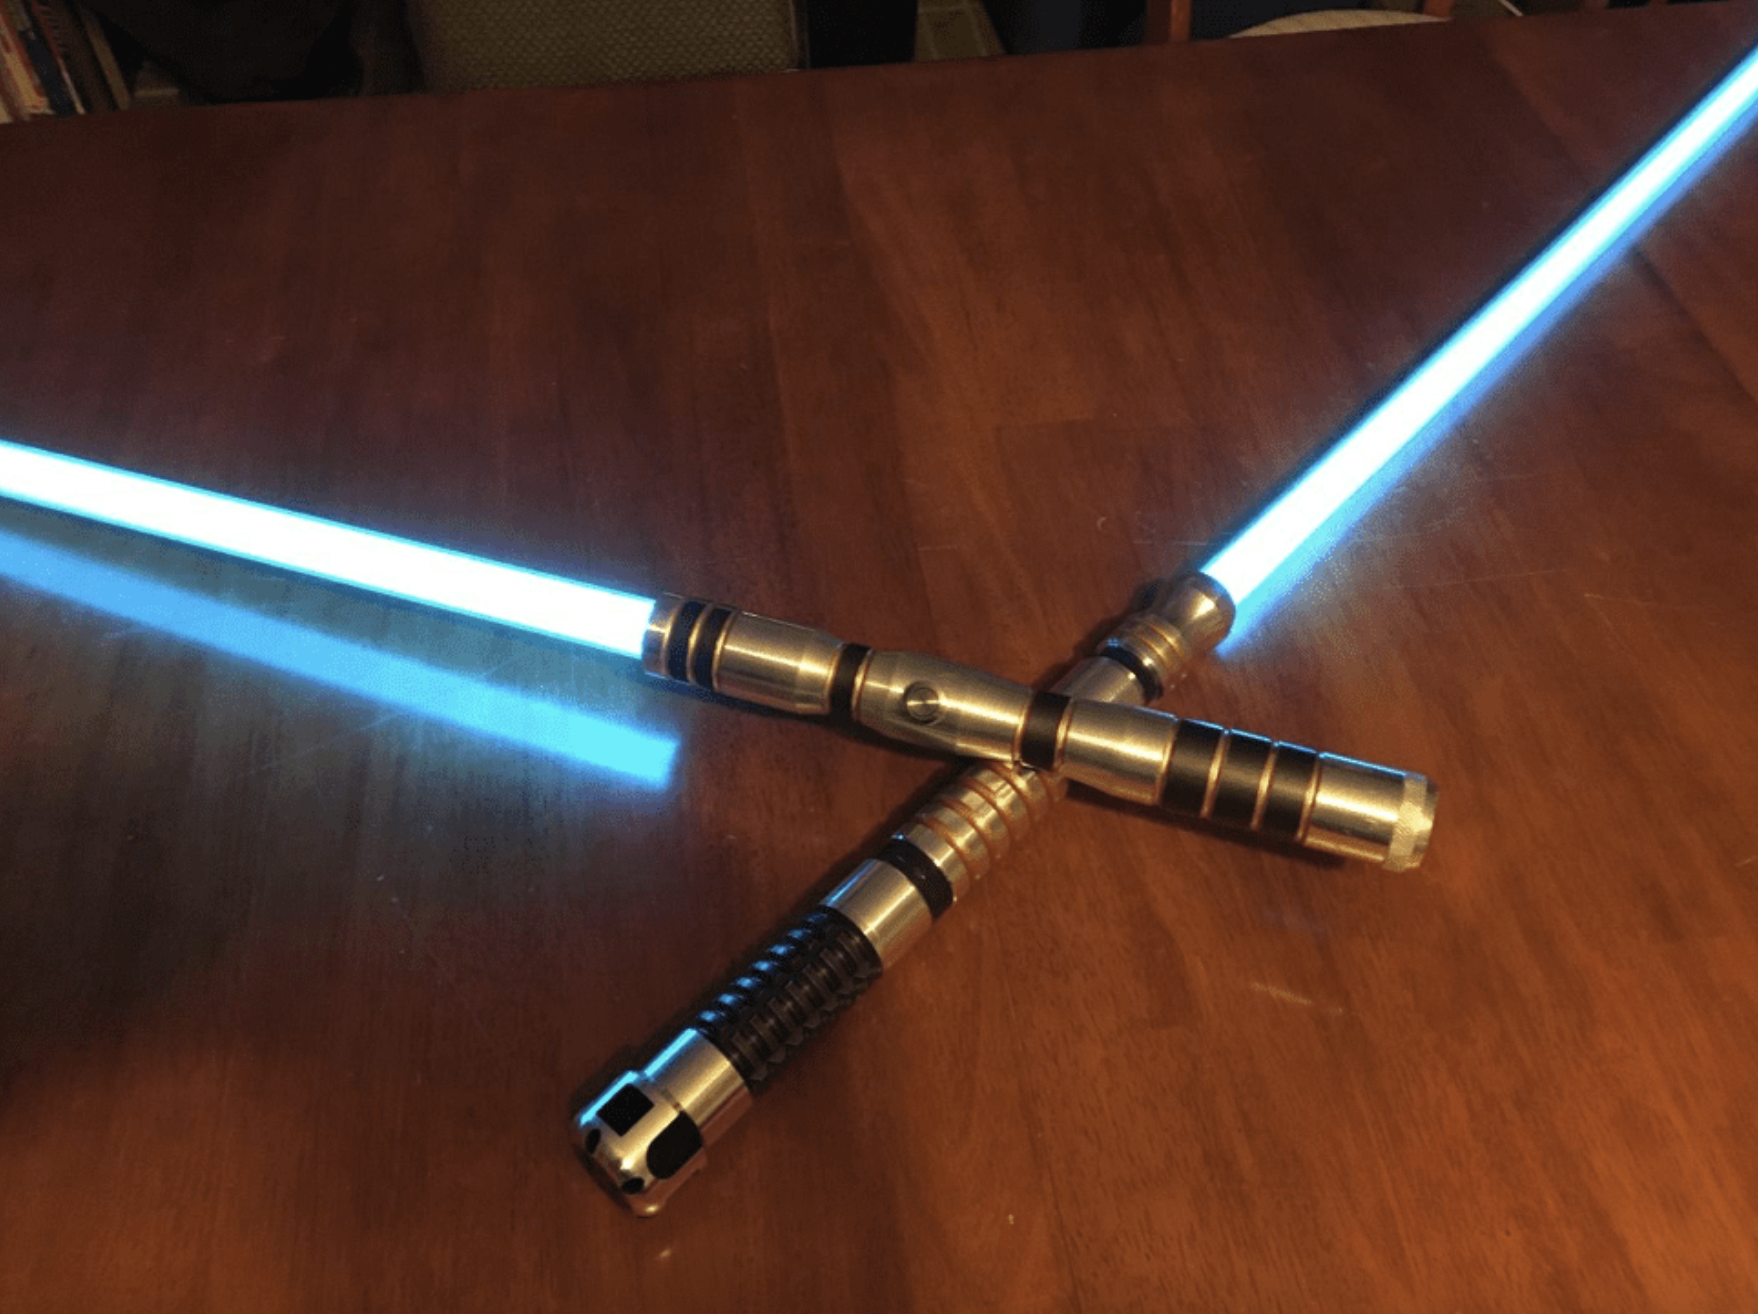 Tips and Tricks for Using Realistic Lightsaber